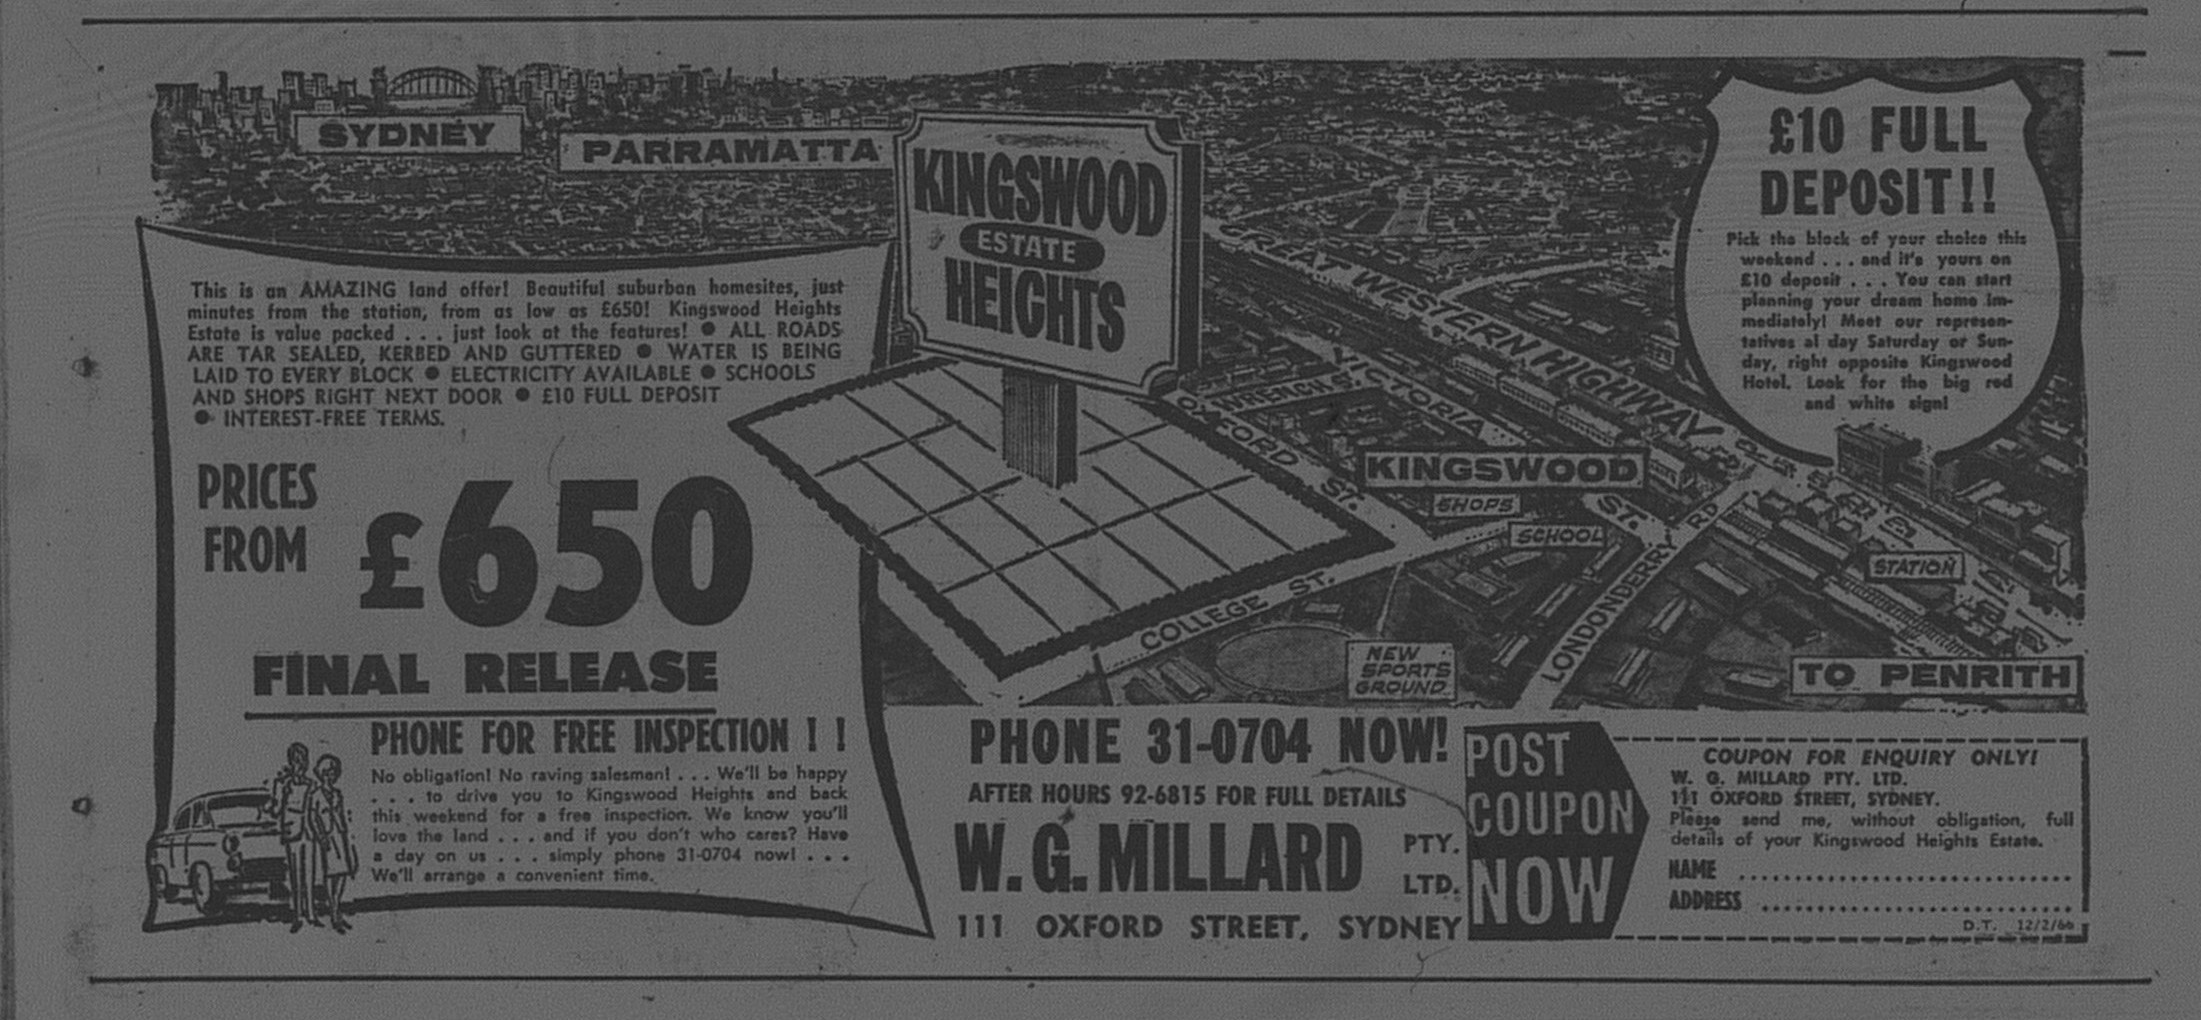 Kingswood Heights February 12 1966 daily telegraph 50